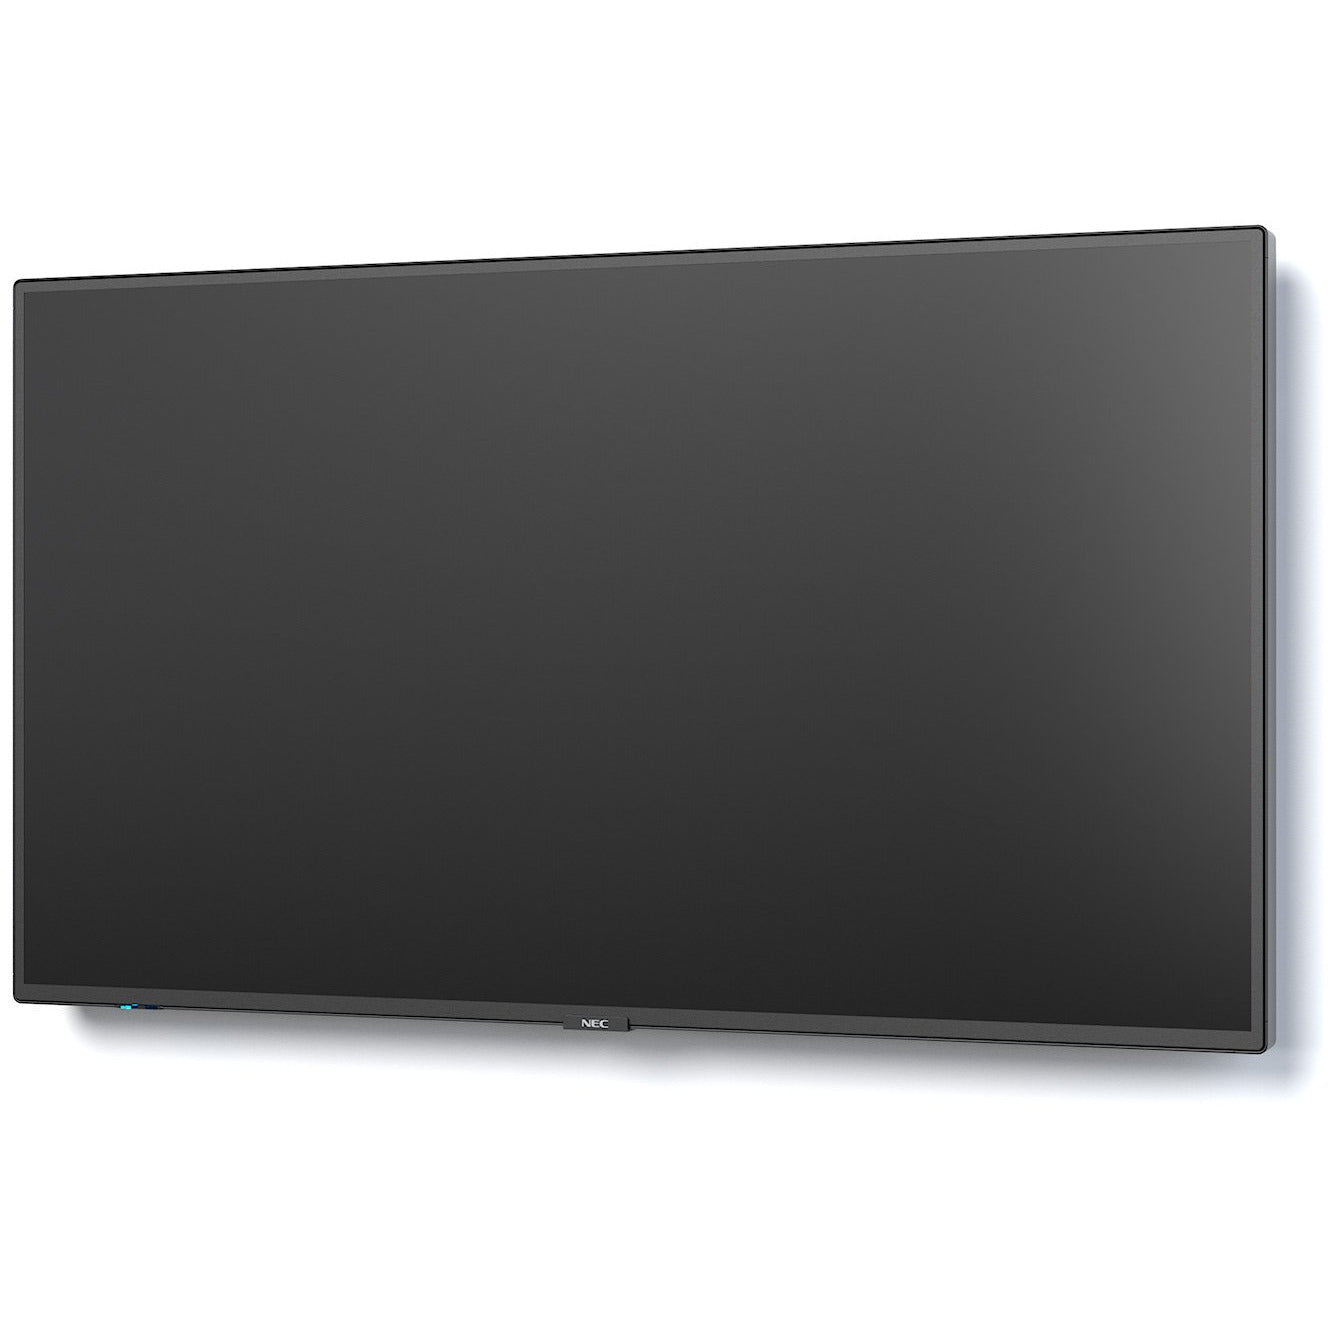 NEC MultiSync® P555-MPi4 LCD 55" Professional Large Format Displays (incl. NEC MediaPlayer)